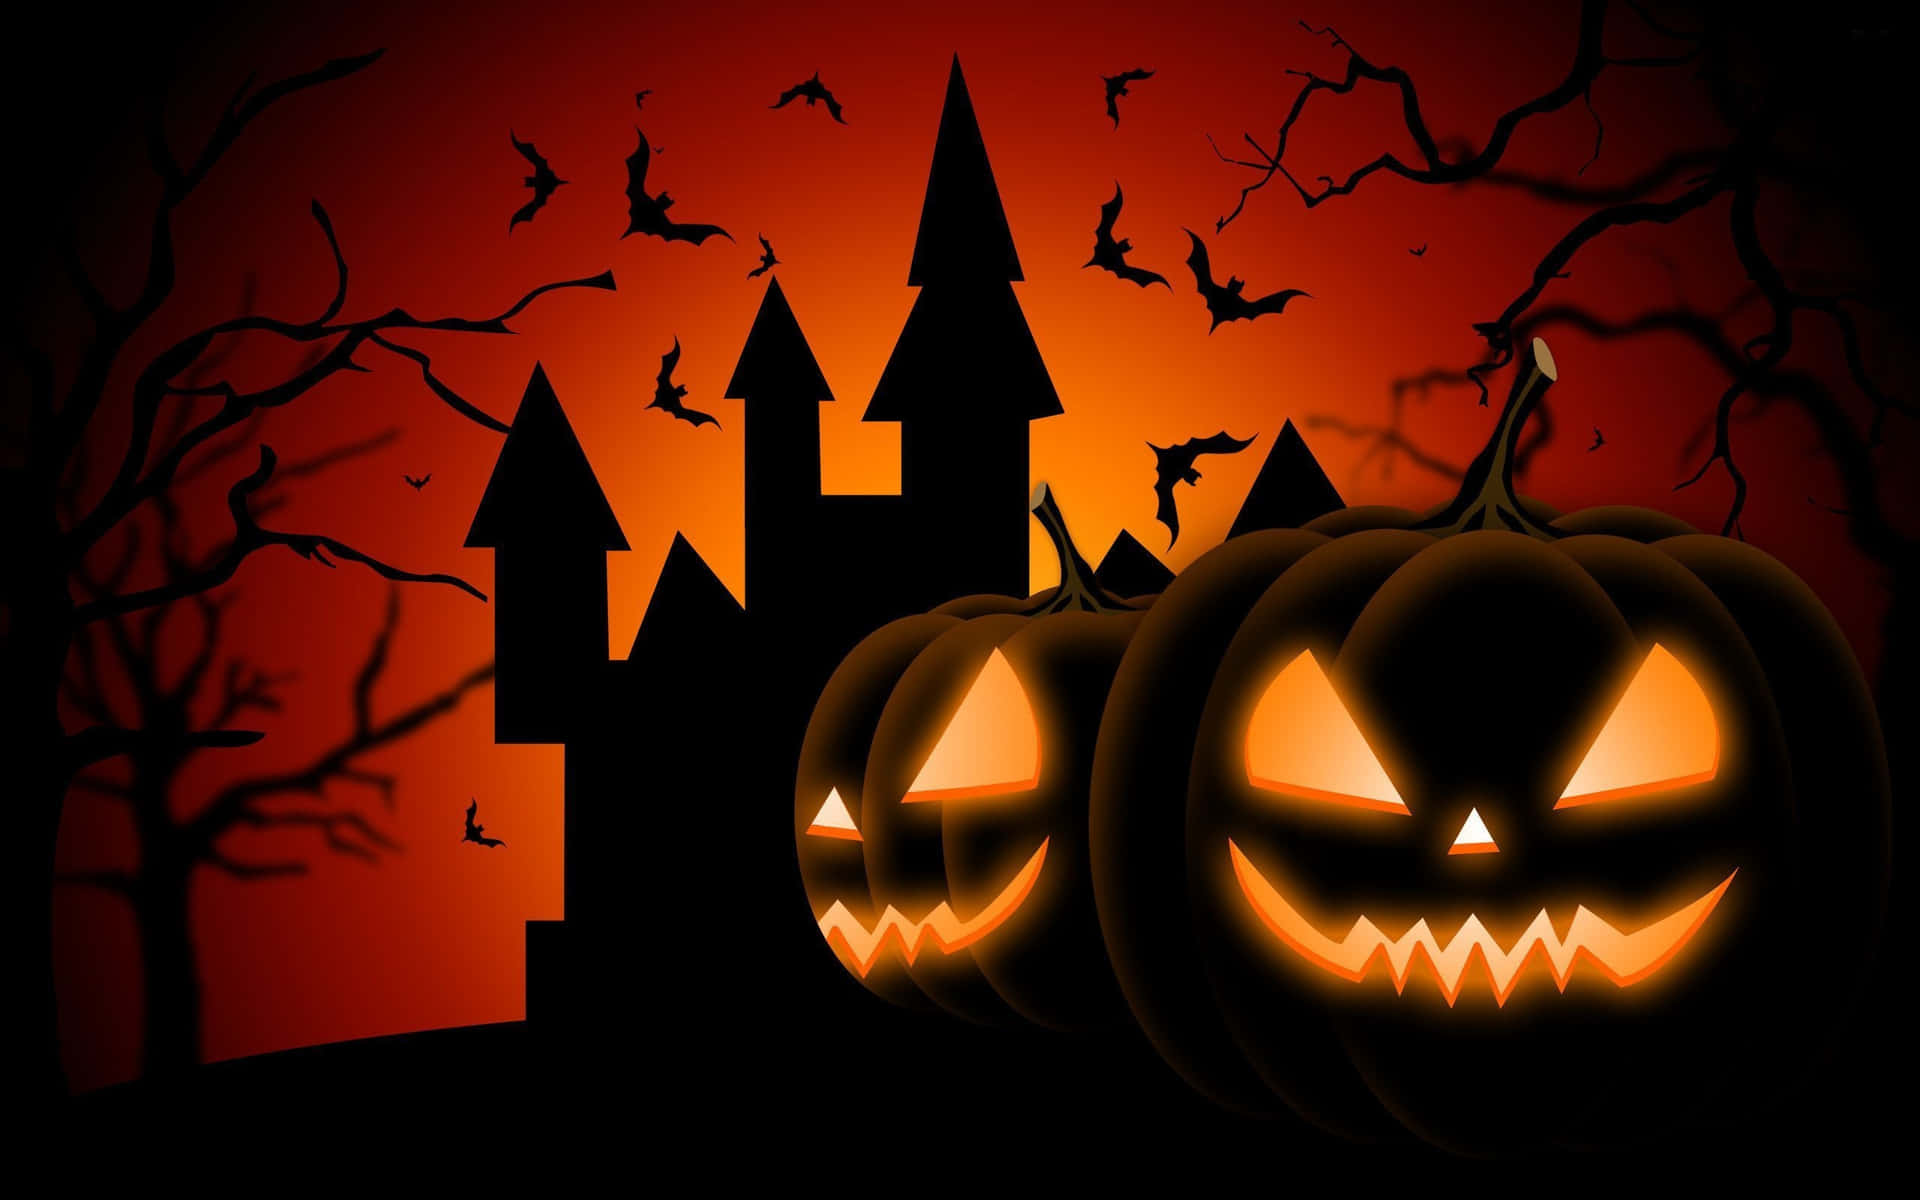 Get ready for a spooky trick-r-treat night! Wallpaper